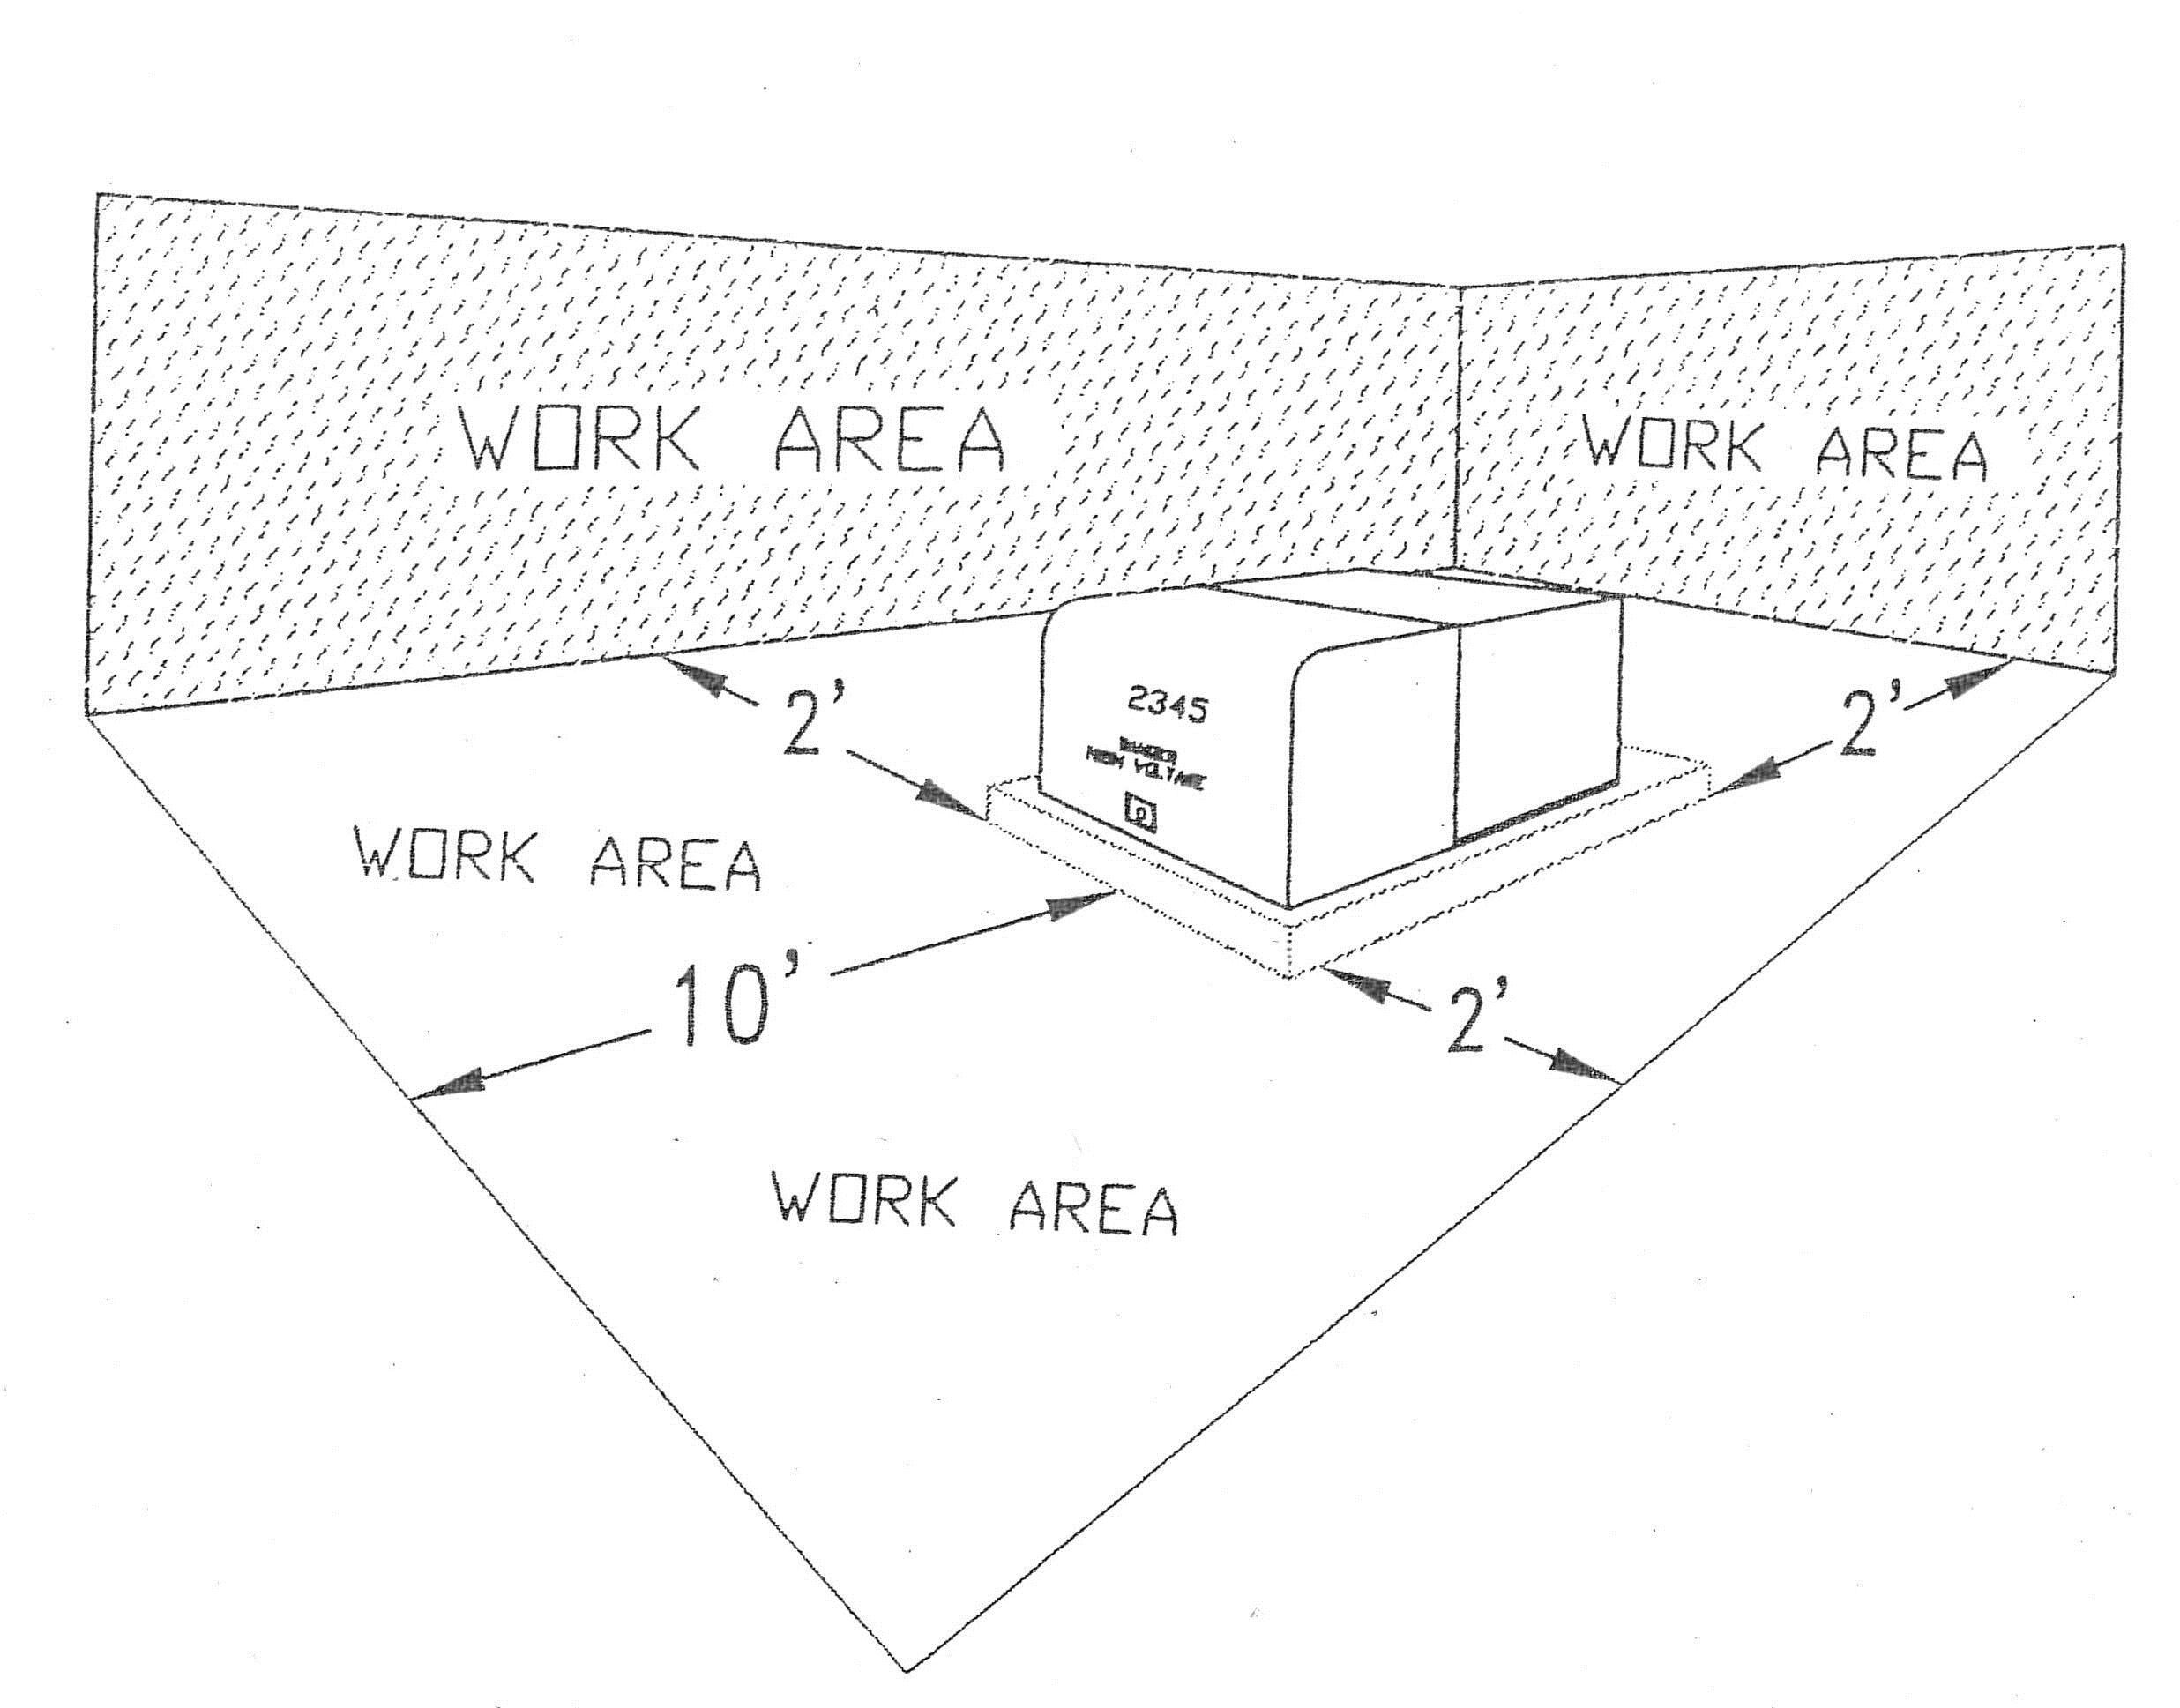 Sketch of work area with measurements to show safe zone